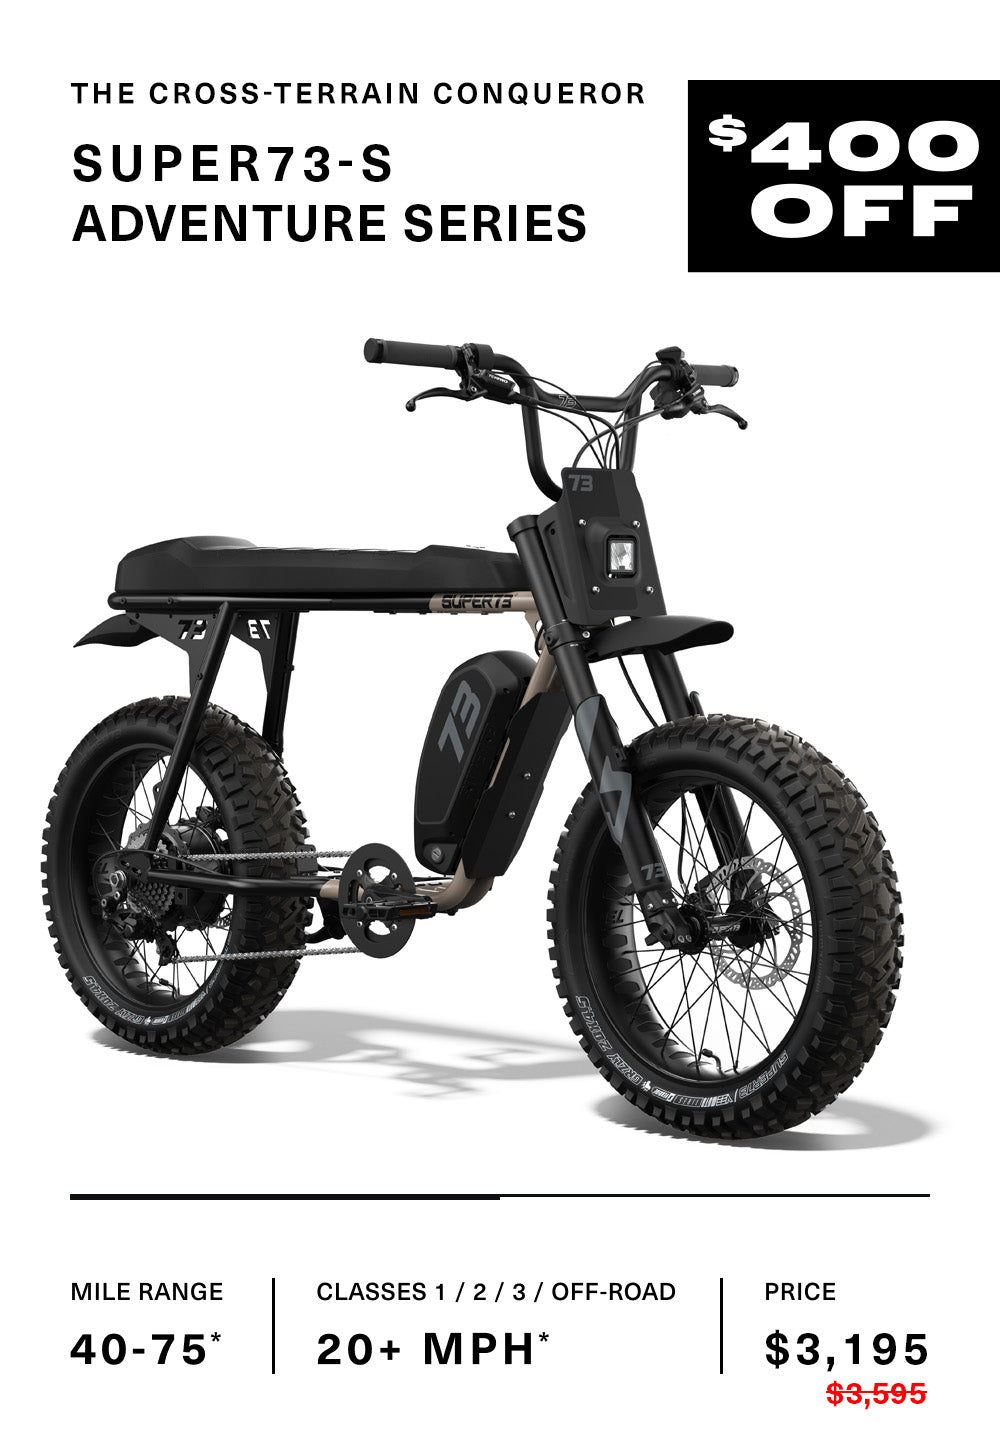 Promotional image showing the S Adventure Series bike at $400 off